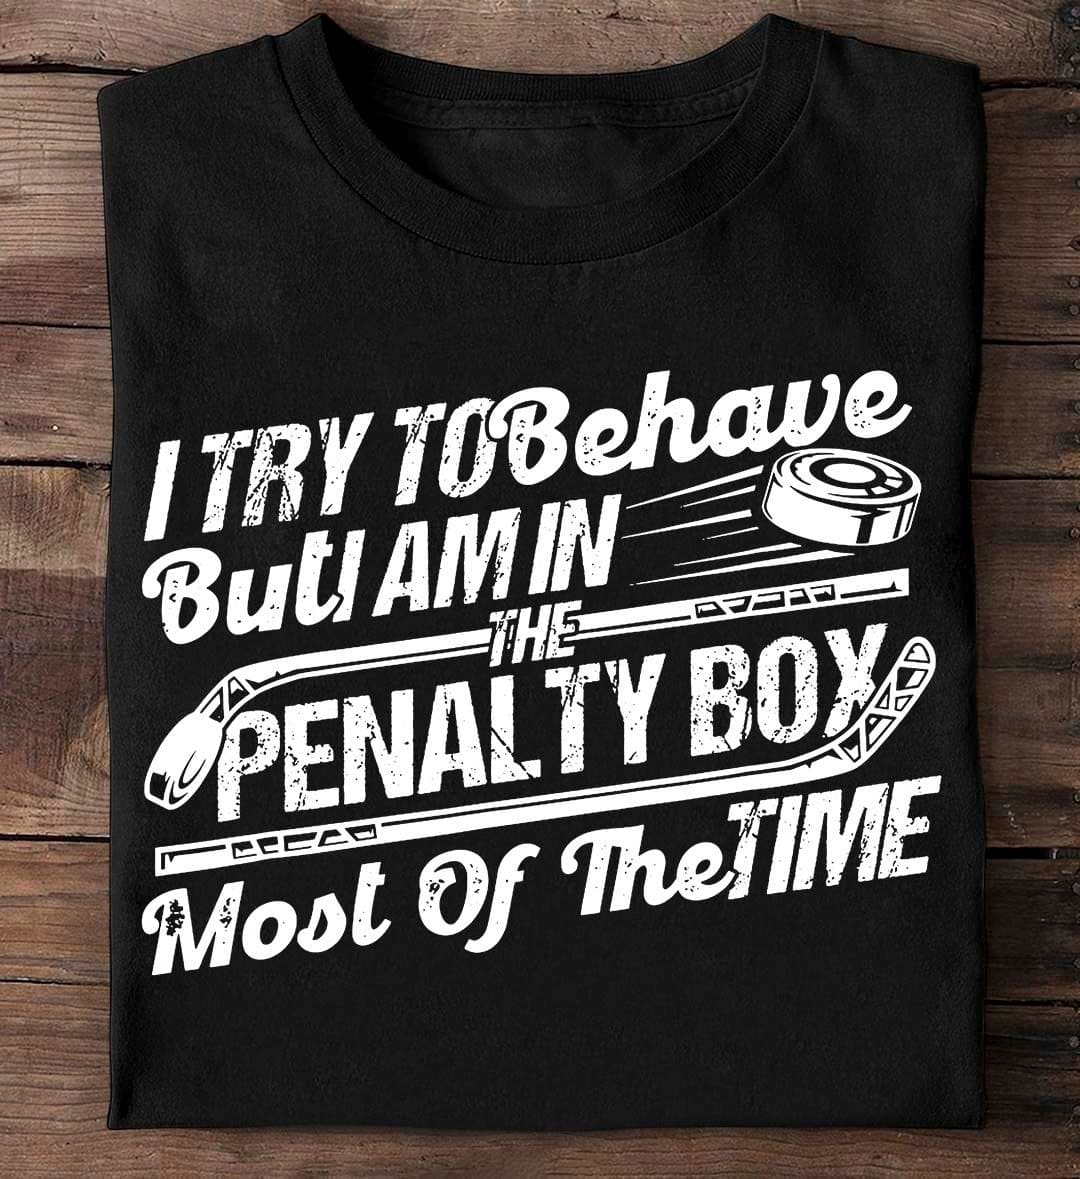 I try to behave but I am in the penalty box most of the time - Hockey player T-shirt